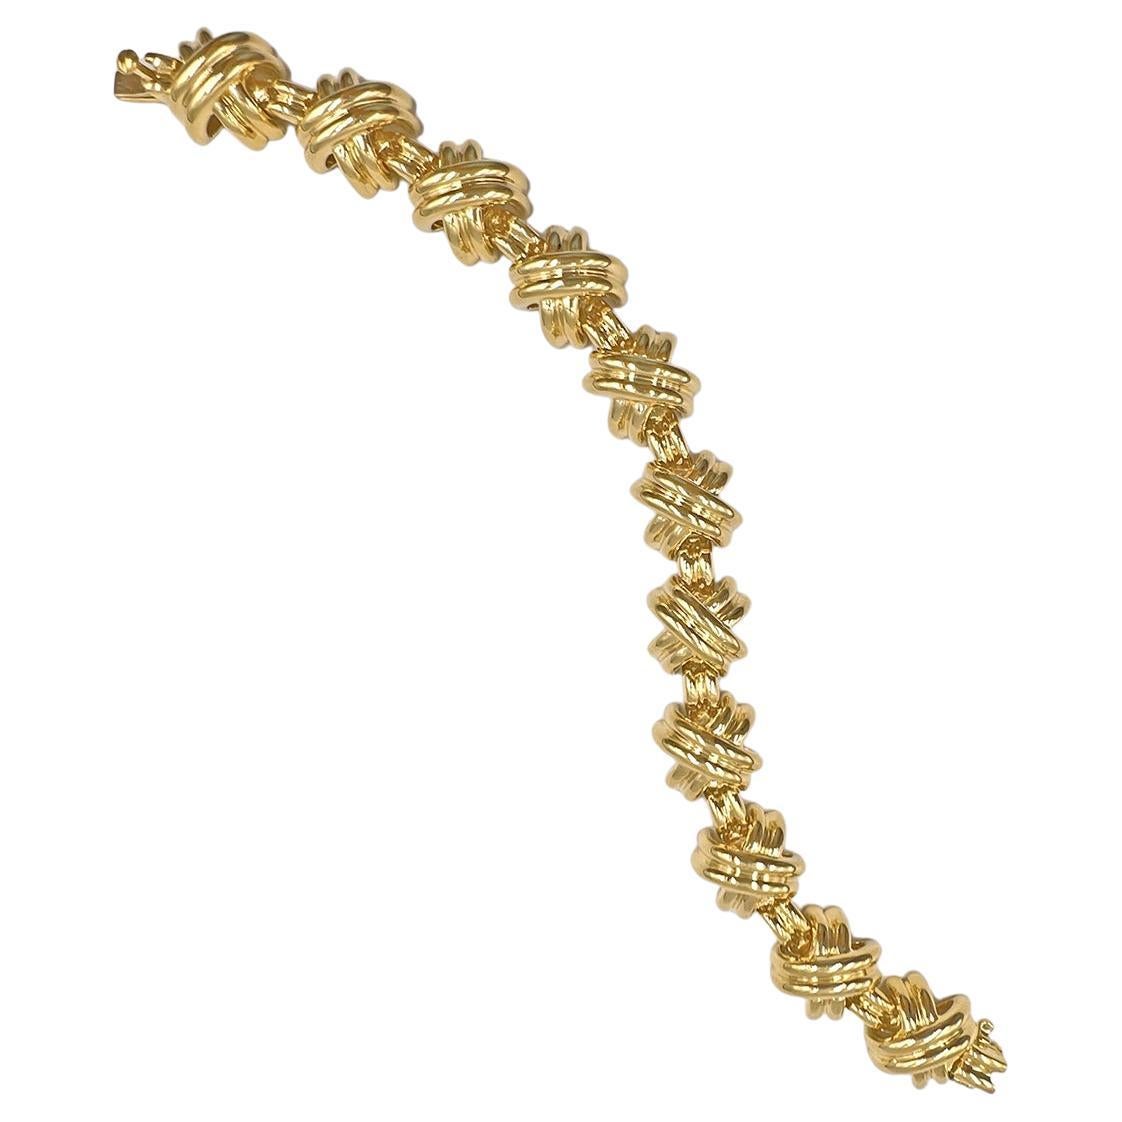 Classic Tiffany link bracelet in polished 18kt yellow gold.  Eleven raised, curved 'X' motif links with adjoining ribbed gold bar links.  Hidden safety clasp with fold under latch.  Signed 